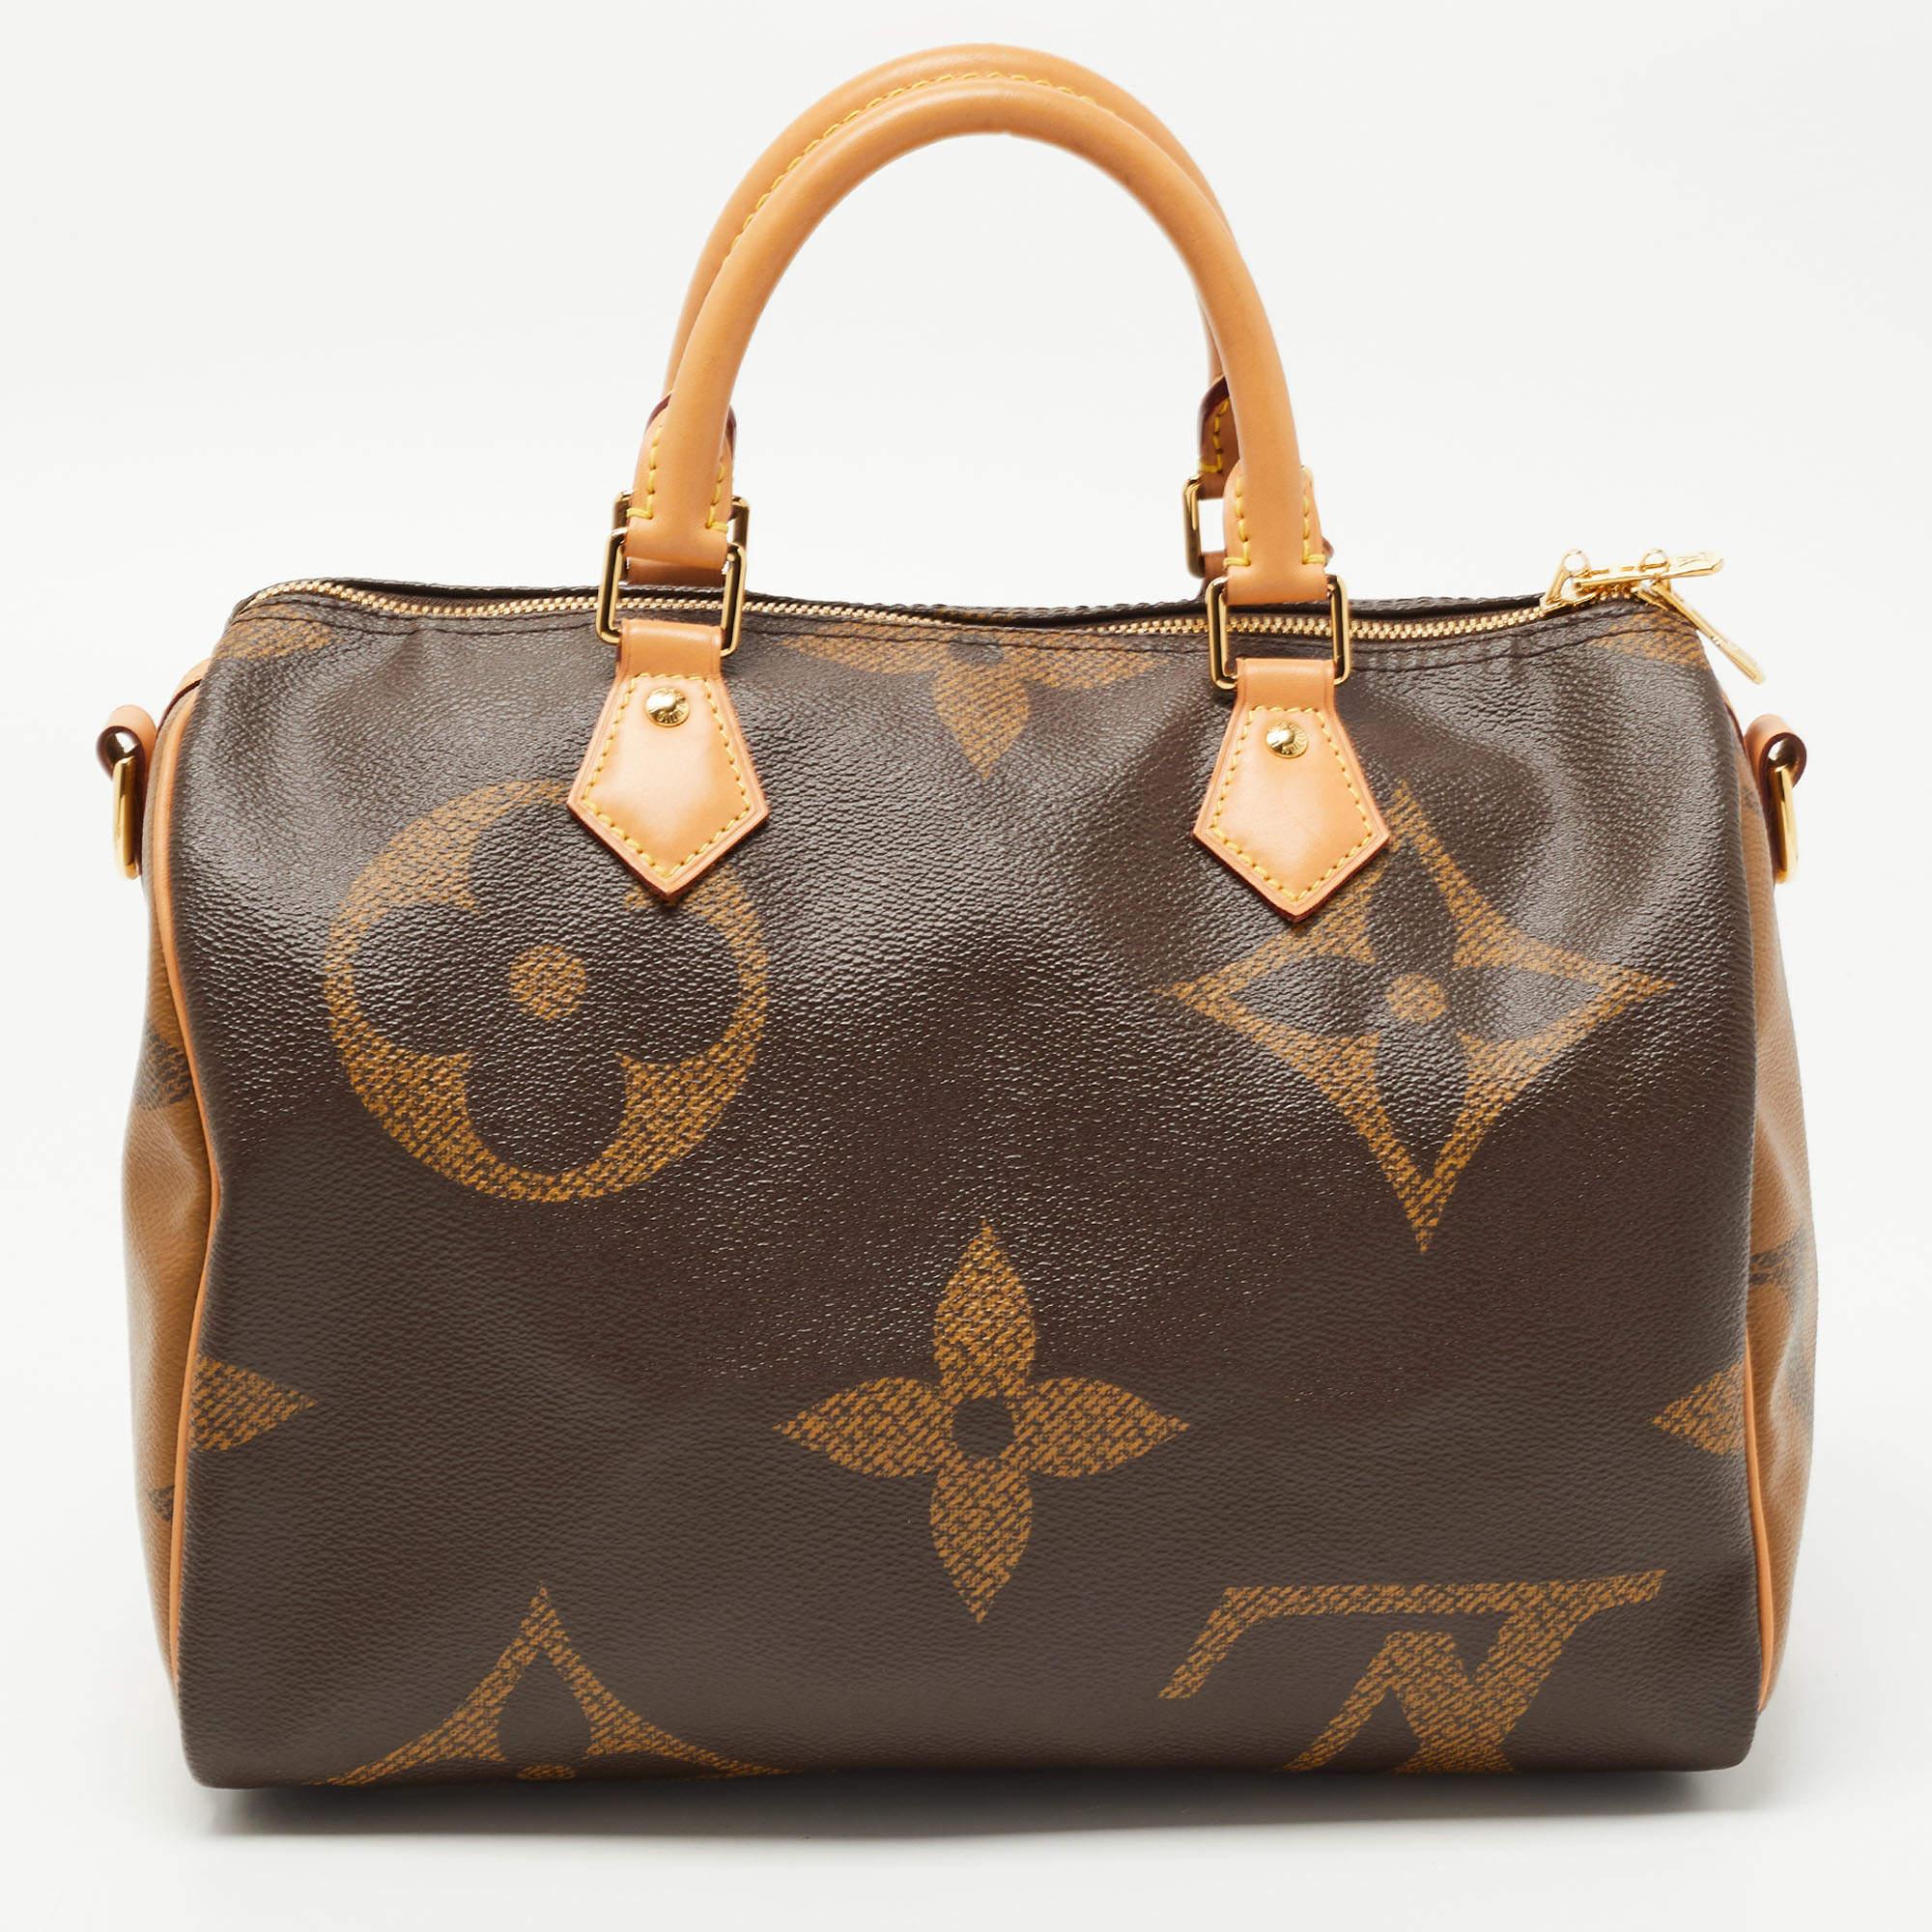 Titled as one of the greatest handbags in fashion, this Speedy Bandouliere 30 bag from Louis Vuitton offers unparalleled style and luxury to everyone. It is made from Reverse Monogram Giant canvas into an eye-catchy structure. It comes with